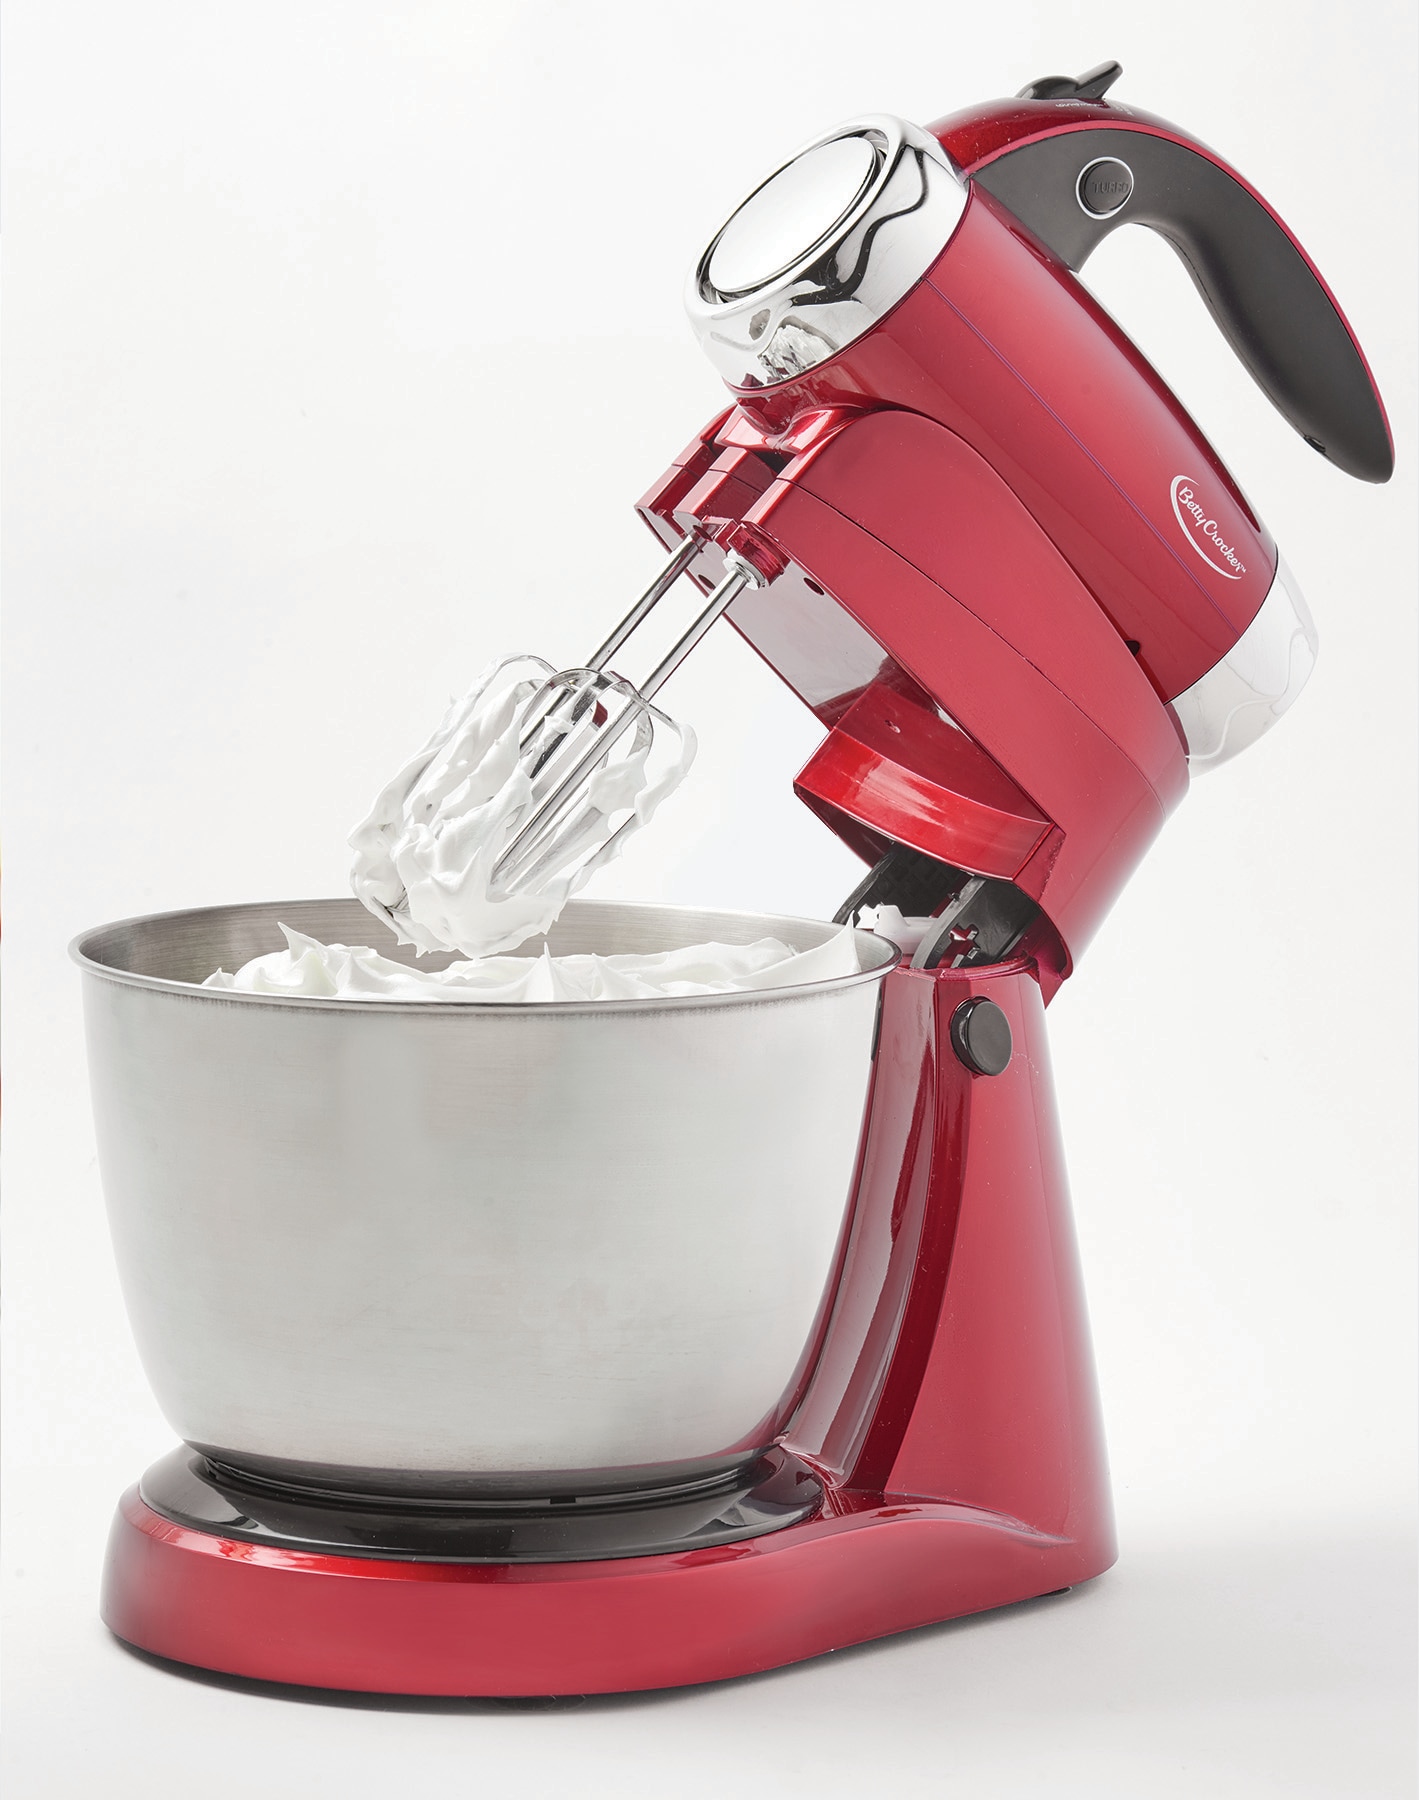 Hamilton Beach Red 7 Speed Stand Mixer - Shop Blenders & Mixers at